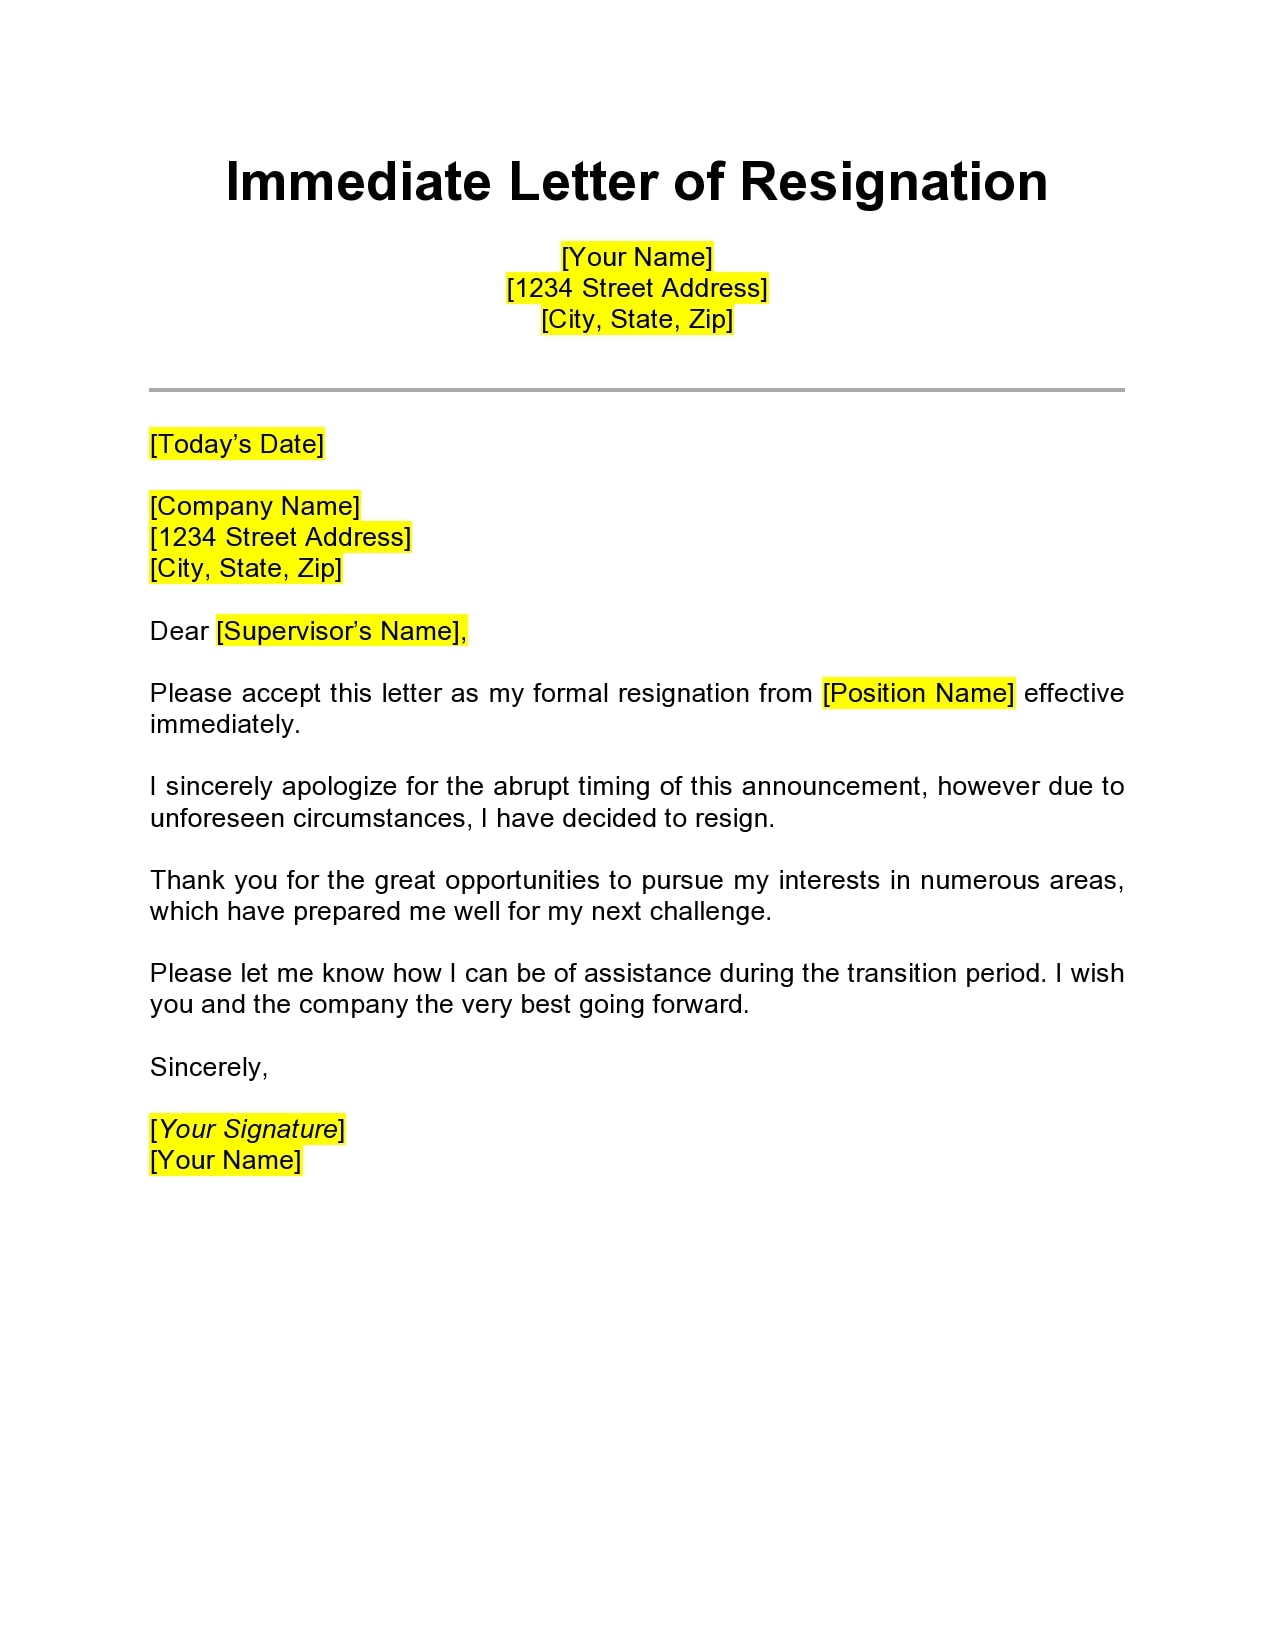 Beautiful Work Tips About Short Resignation Letter Effective